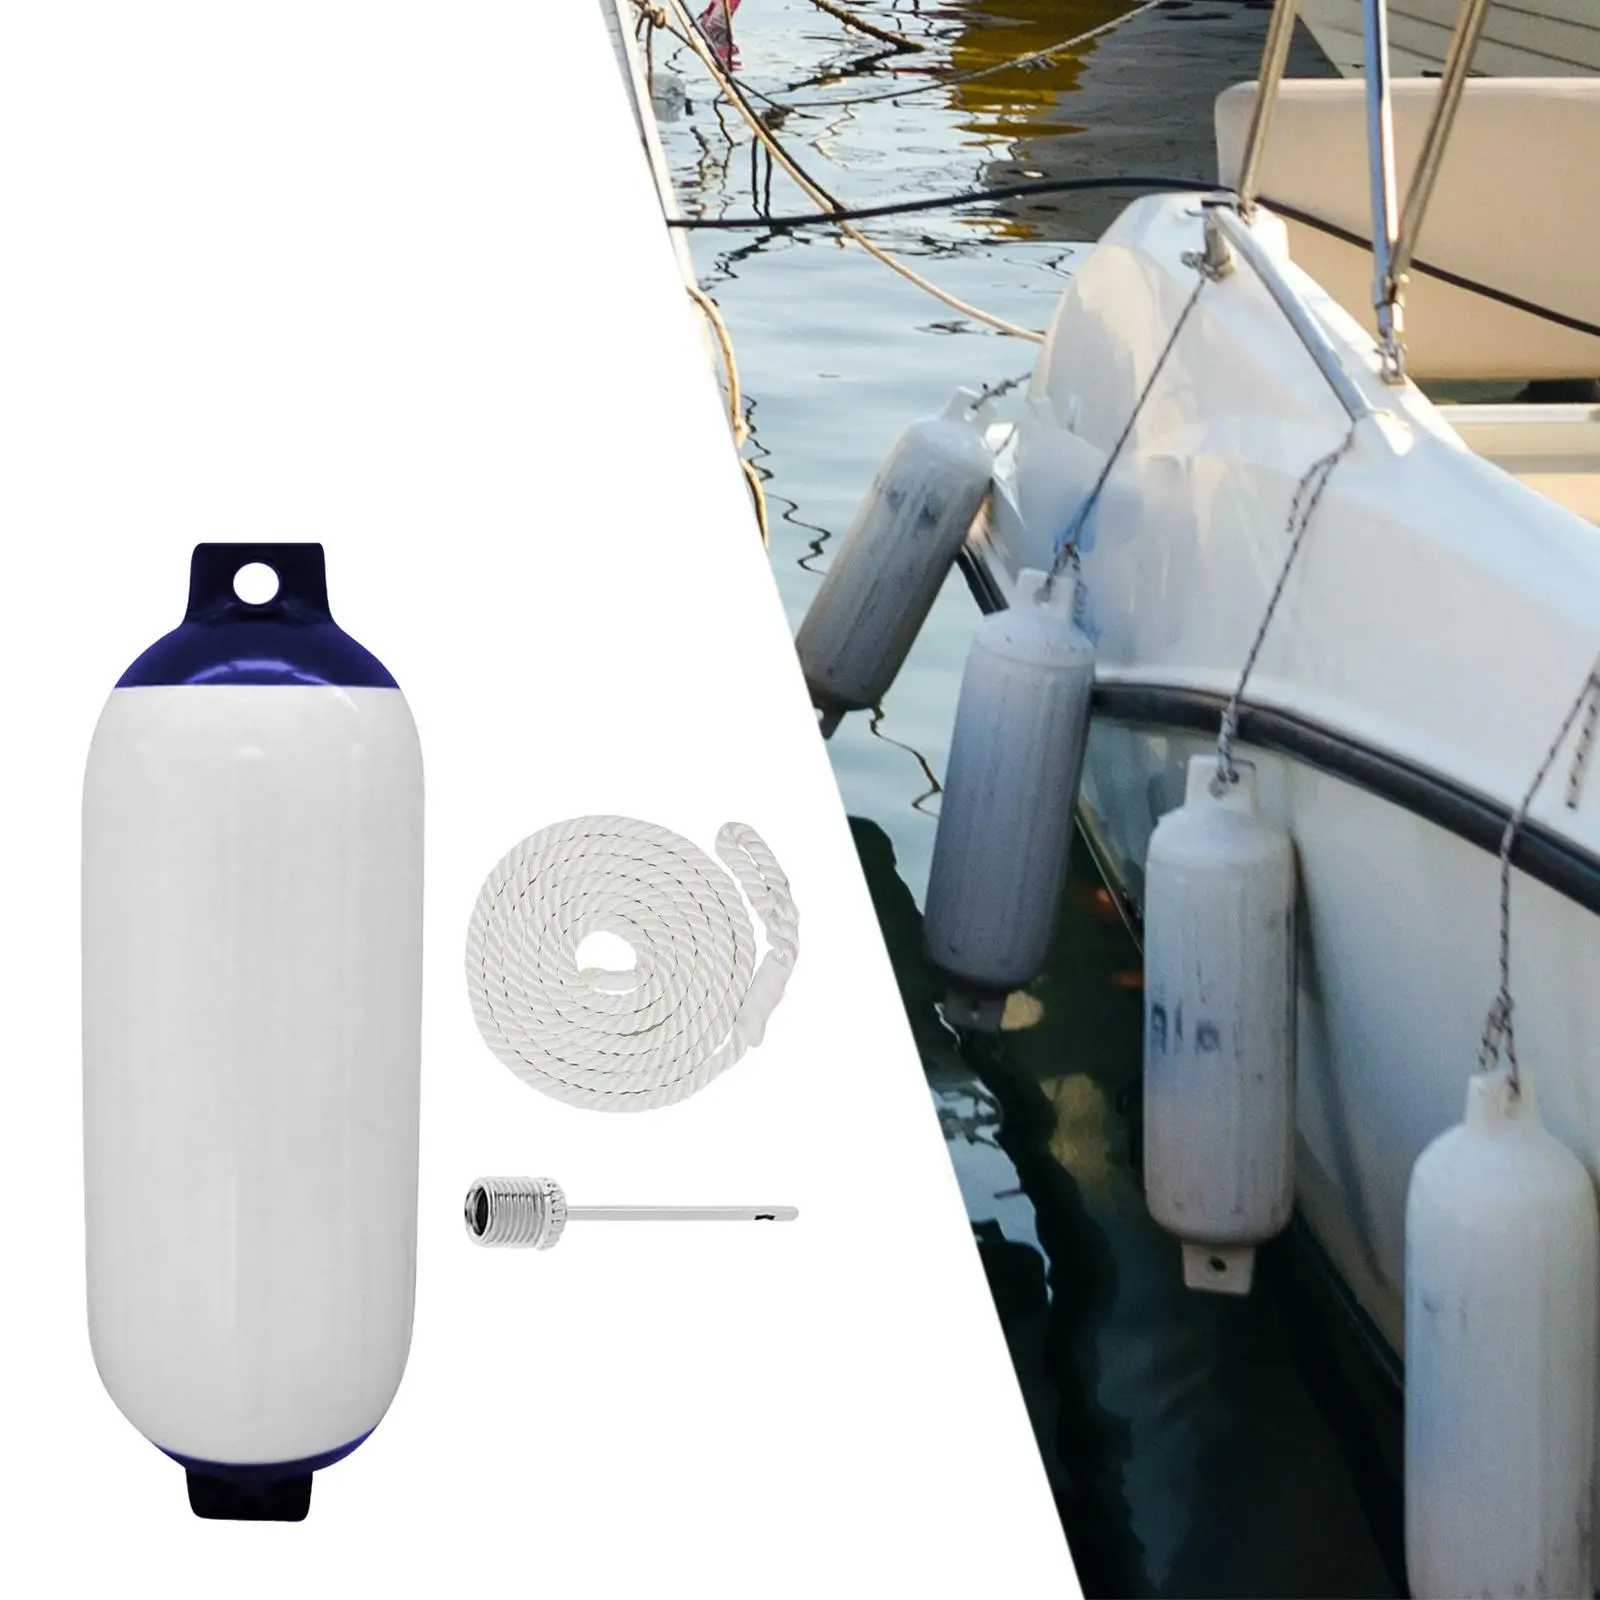 Boat Fender with Rope and Needle 4x16inch Protection Inflatable Boat Bumper for Docking Speedboat Sailboats Yacht Pontoon